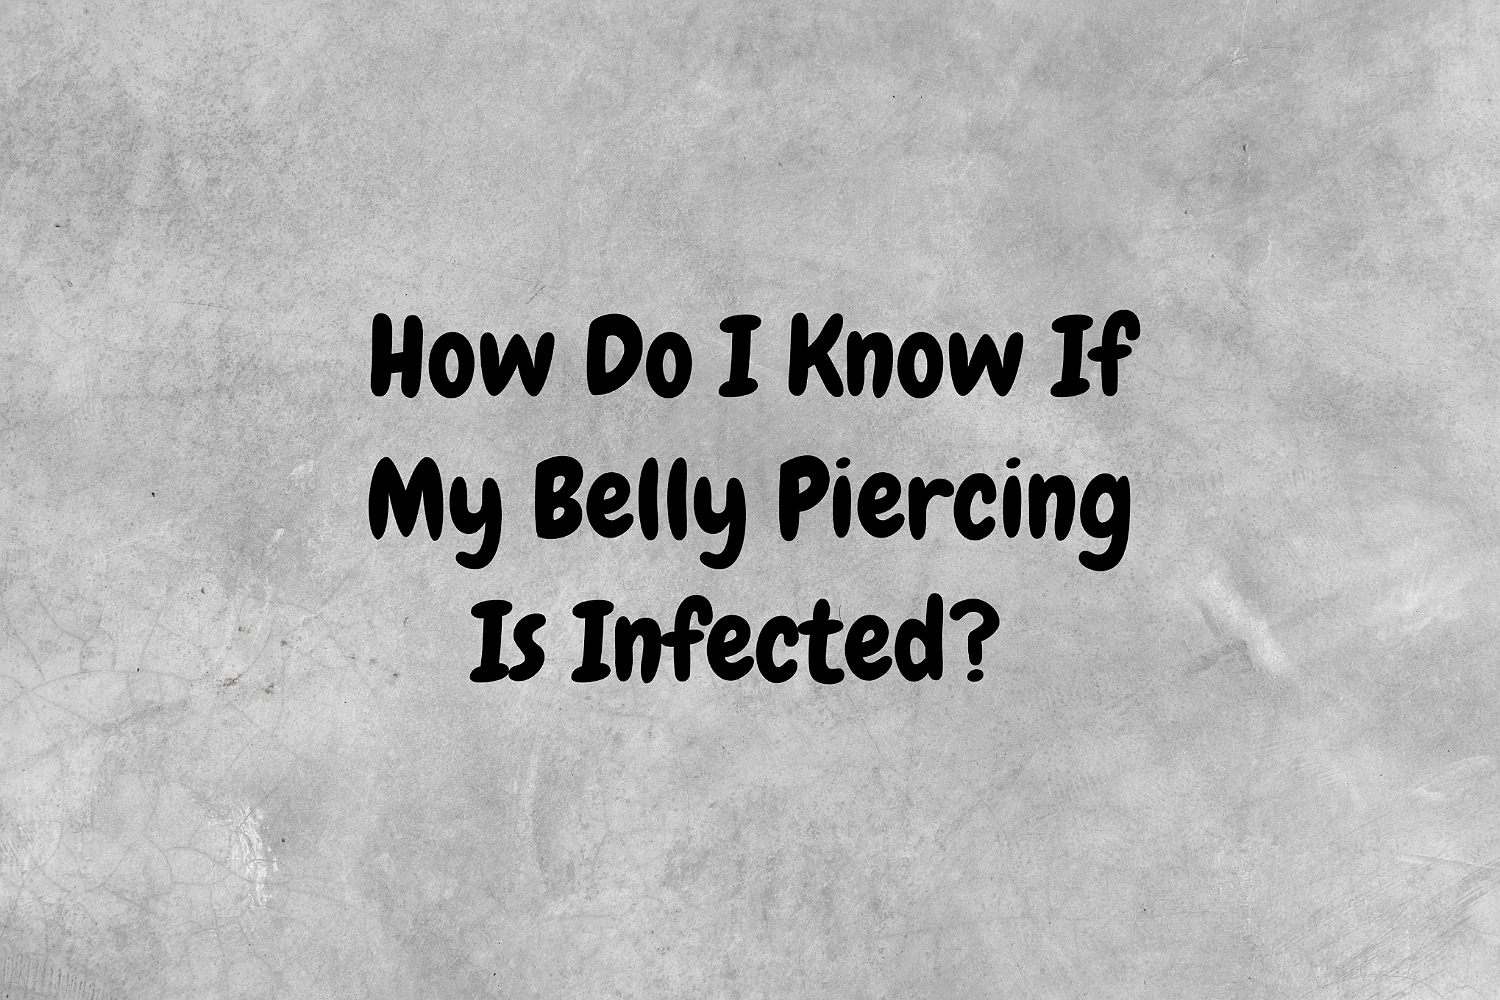 How Do I Know If My Belly Piercing Is Infected? 